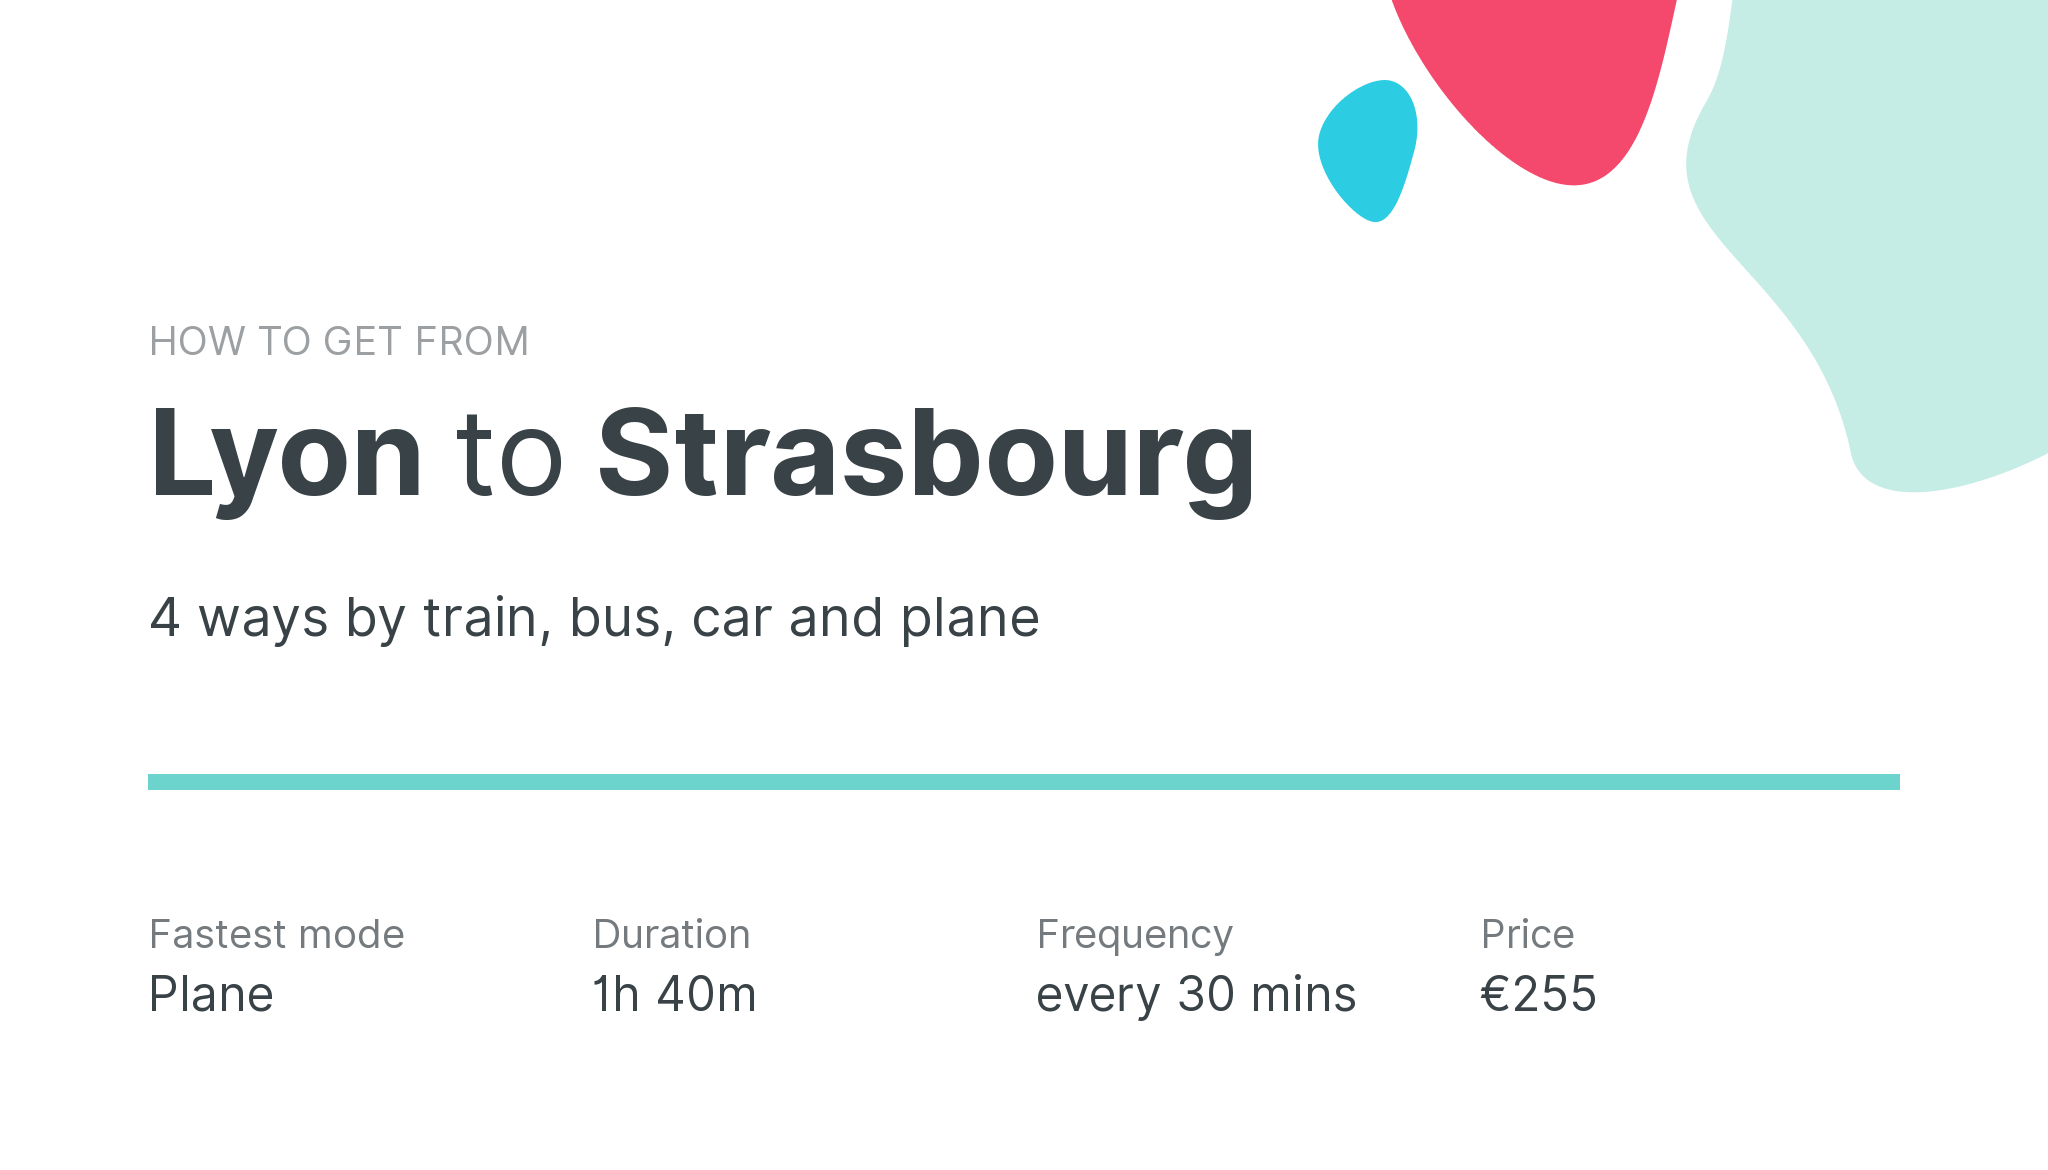 How do I get from Lyon to Strasbourg